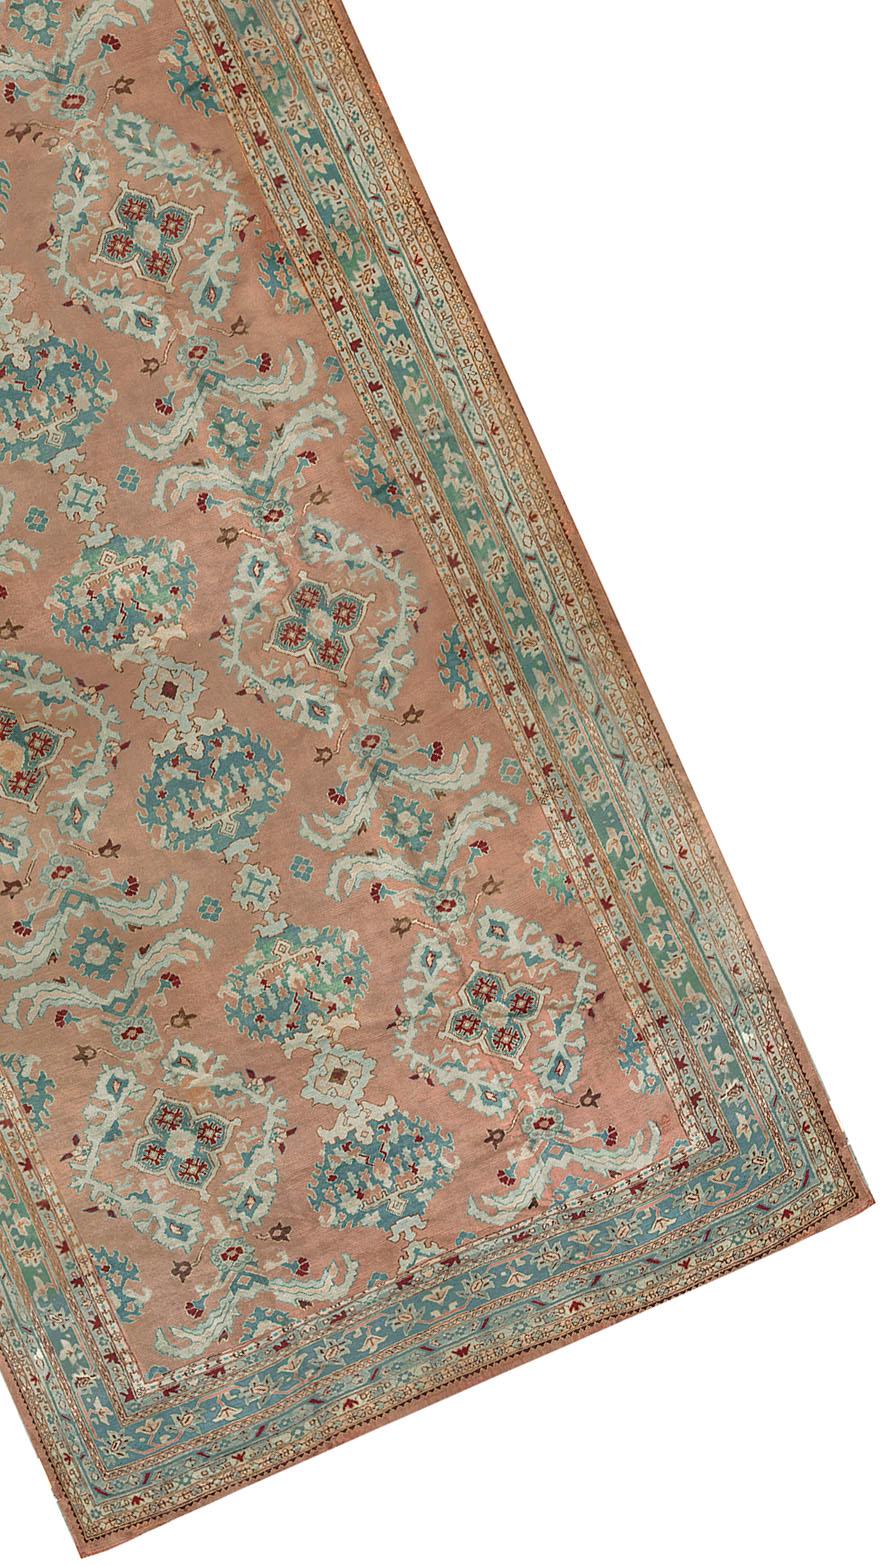 This Antique Turkish Oushak rug is a testament to the timeless beauty and craftsmanship of traditional Turkish weaving. Handwoven with the utmost care and attention to detail, this luxurious wool rug showcases a captivating blend of colors and